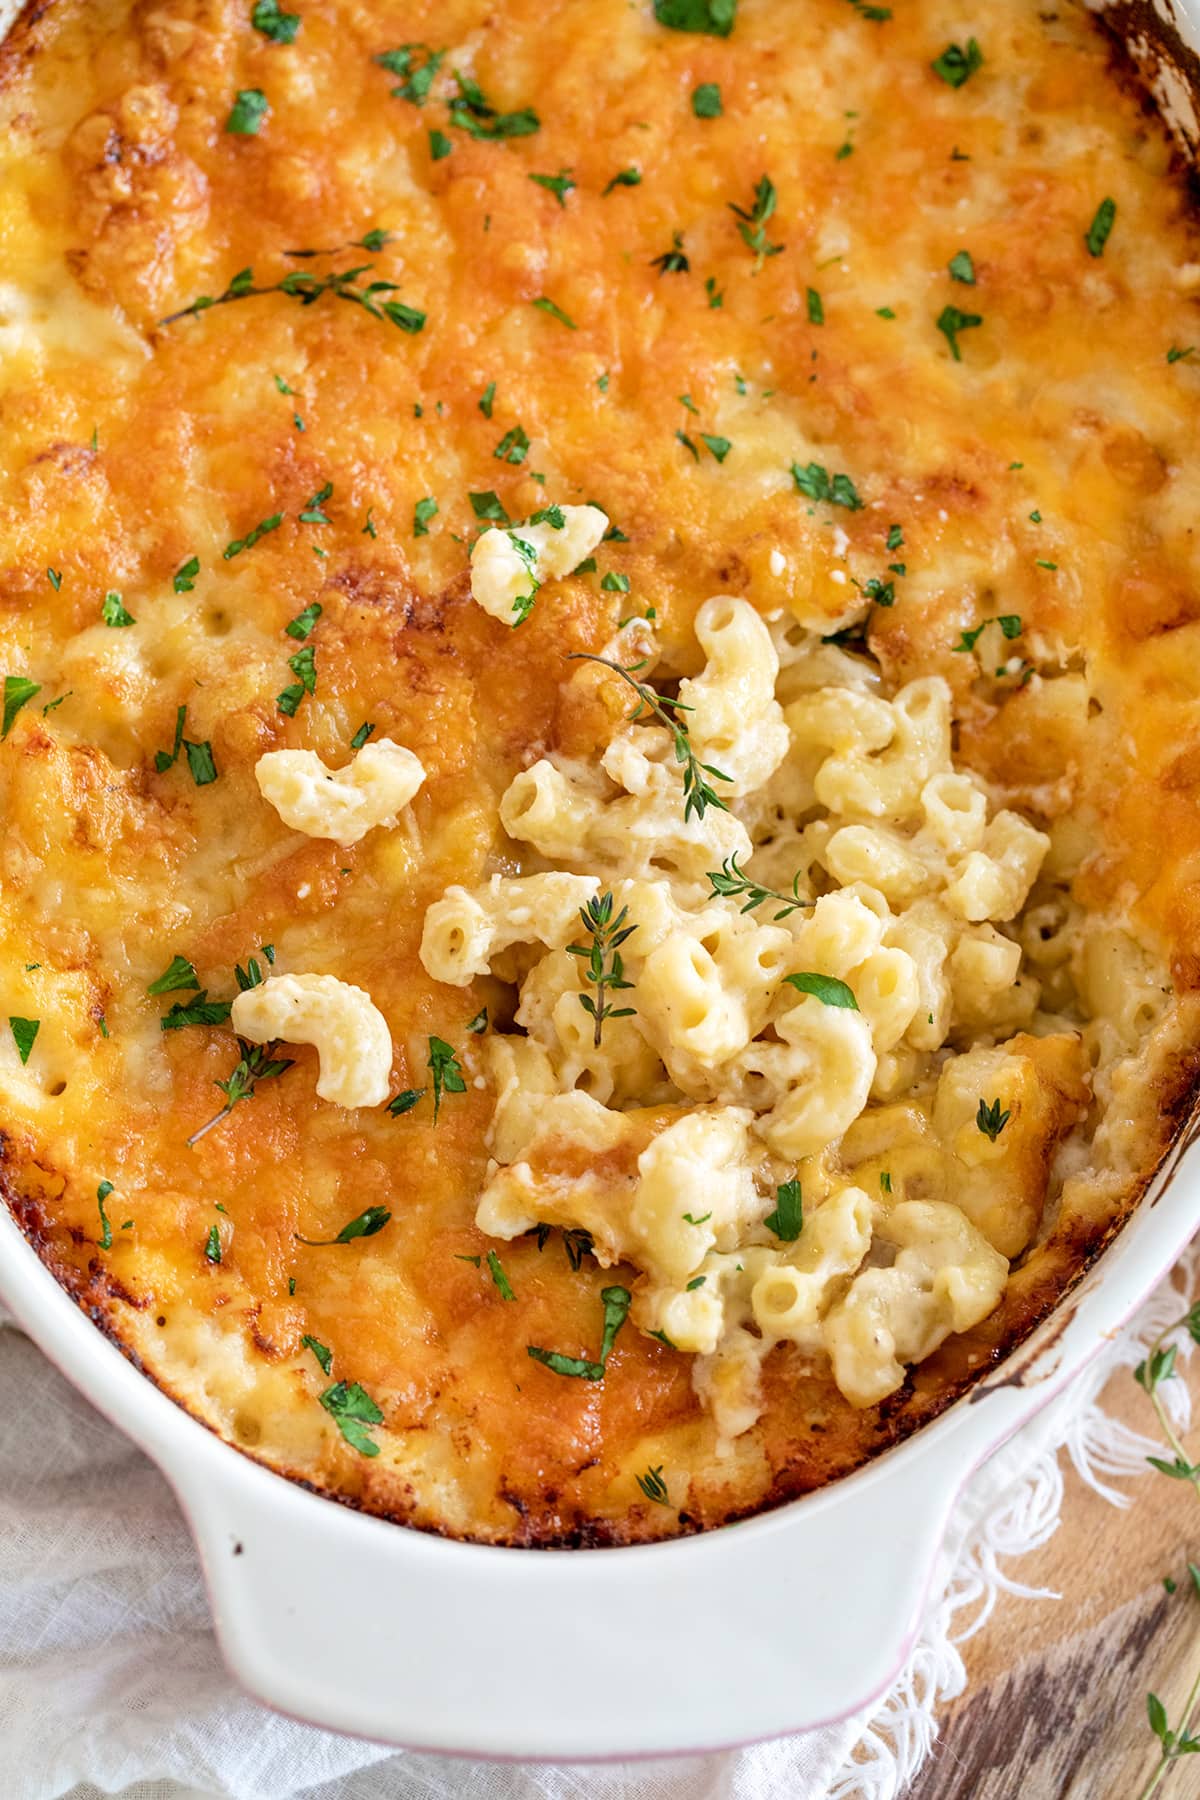 find simple recipe for homemade mac and cheese